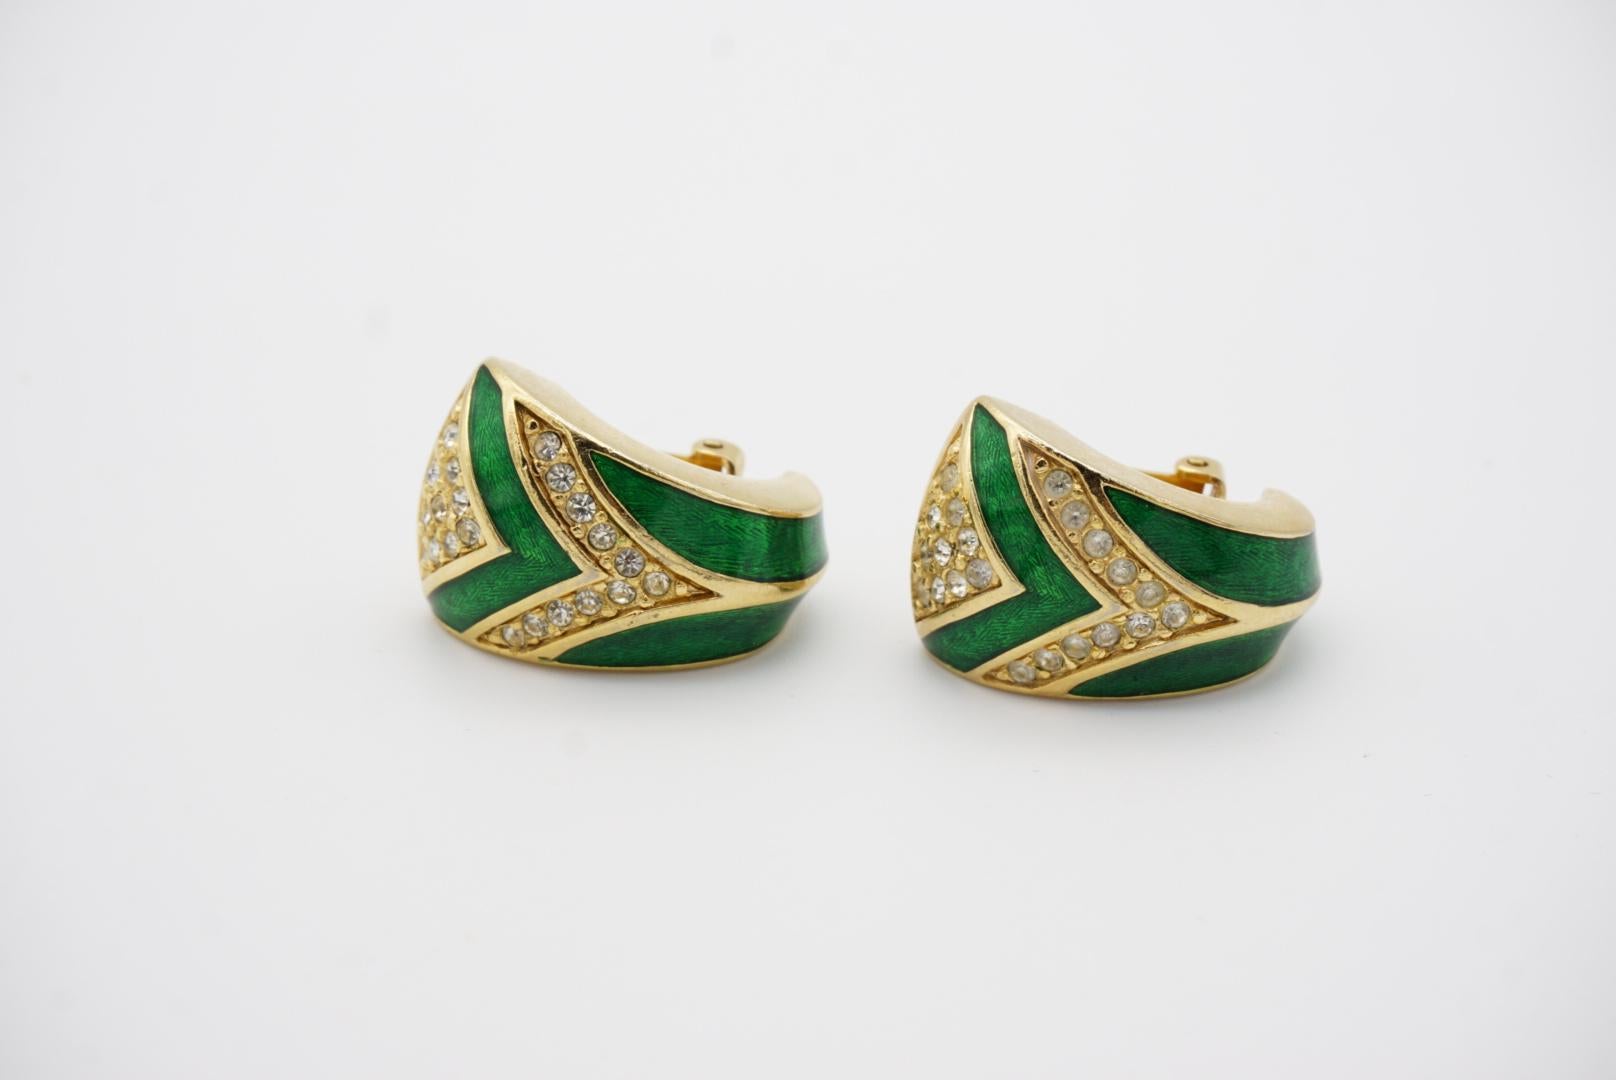 Christian Dior 1980s Green Enamel Crystal Rectangle Triangle Dome Hoop Earrings For Sale 2